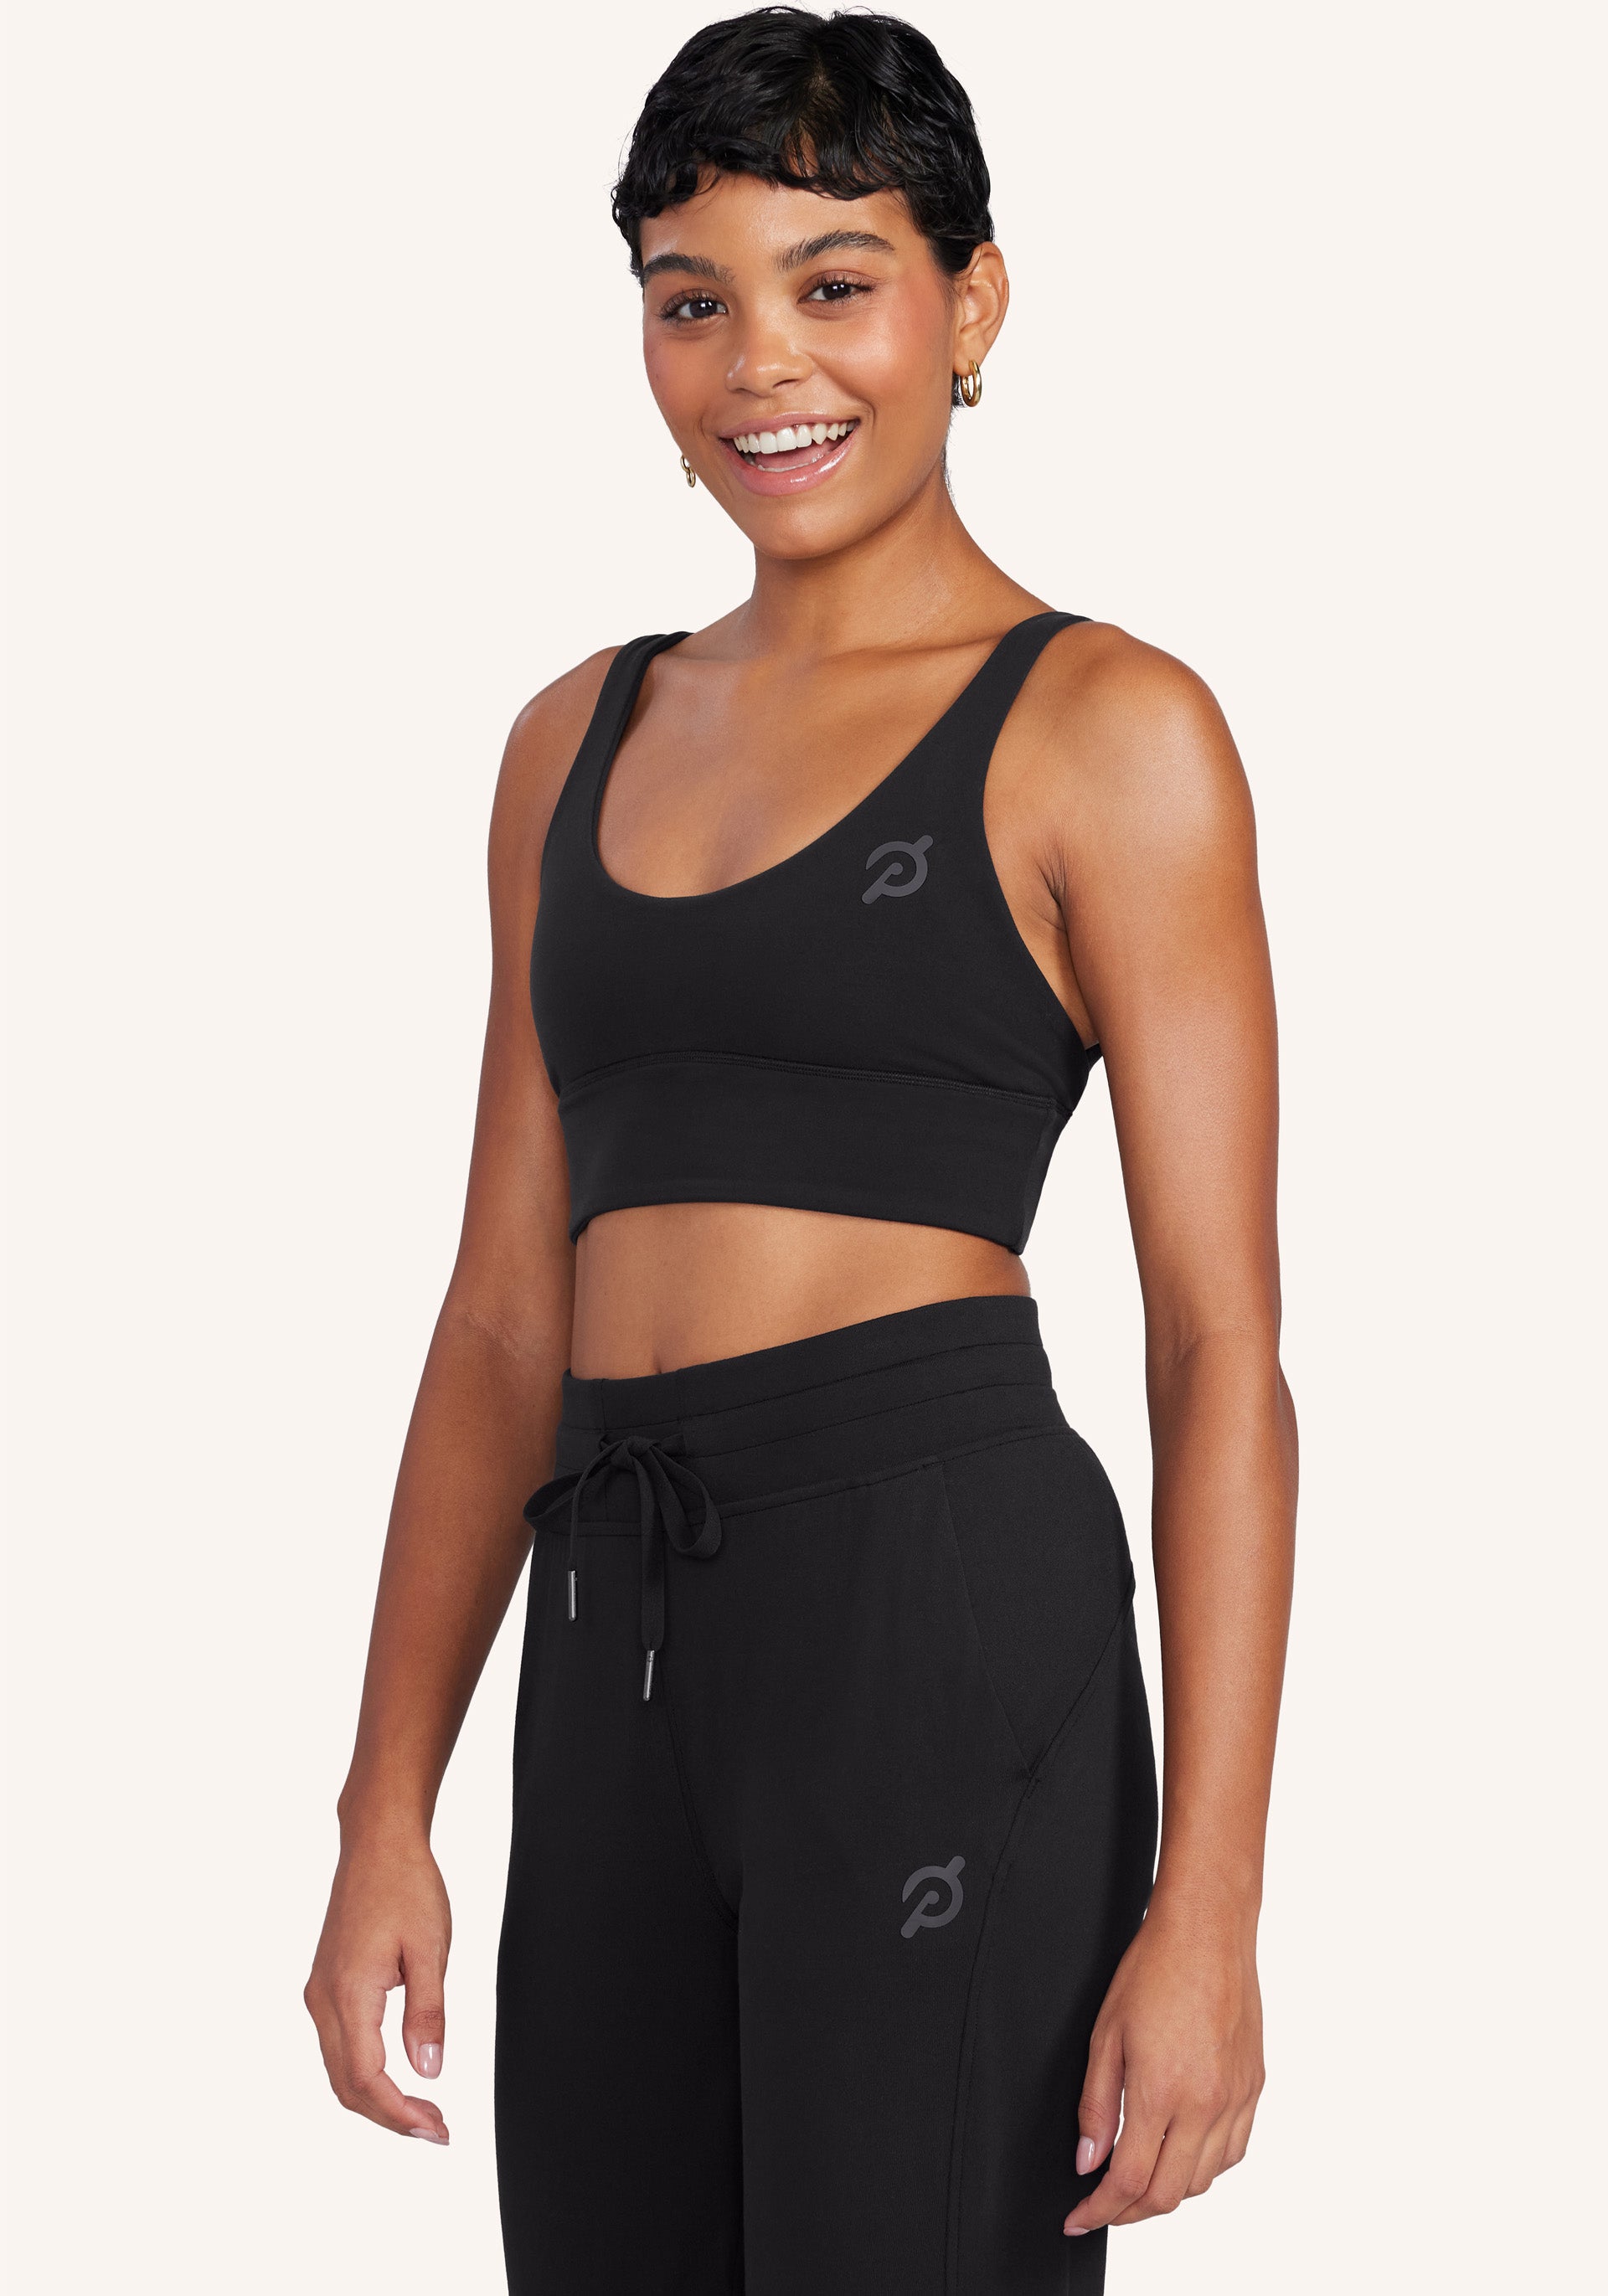 The New Cross-Back Nulu Yoga Tank for A/B cup? : r/lululemon